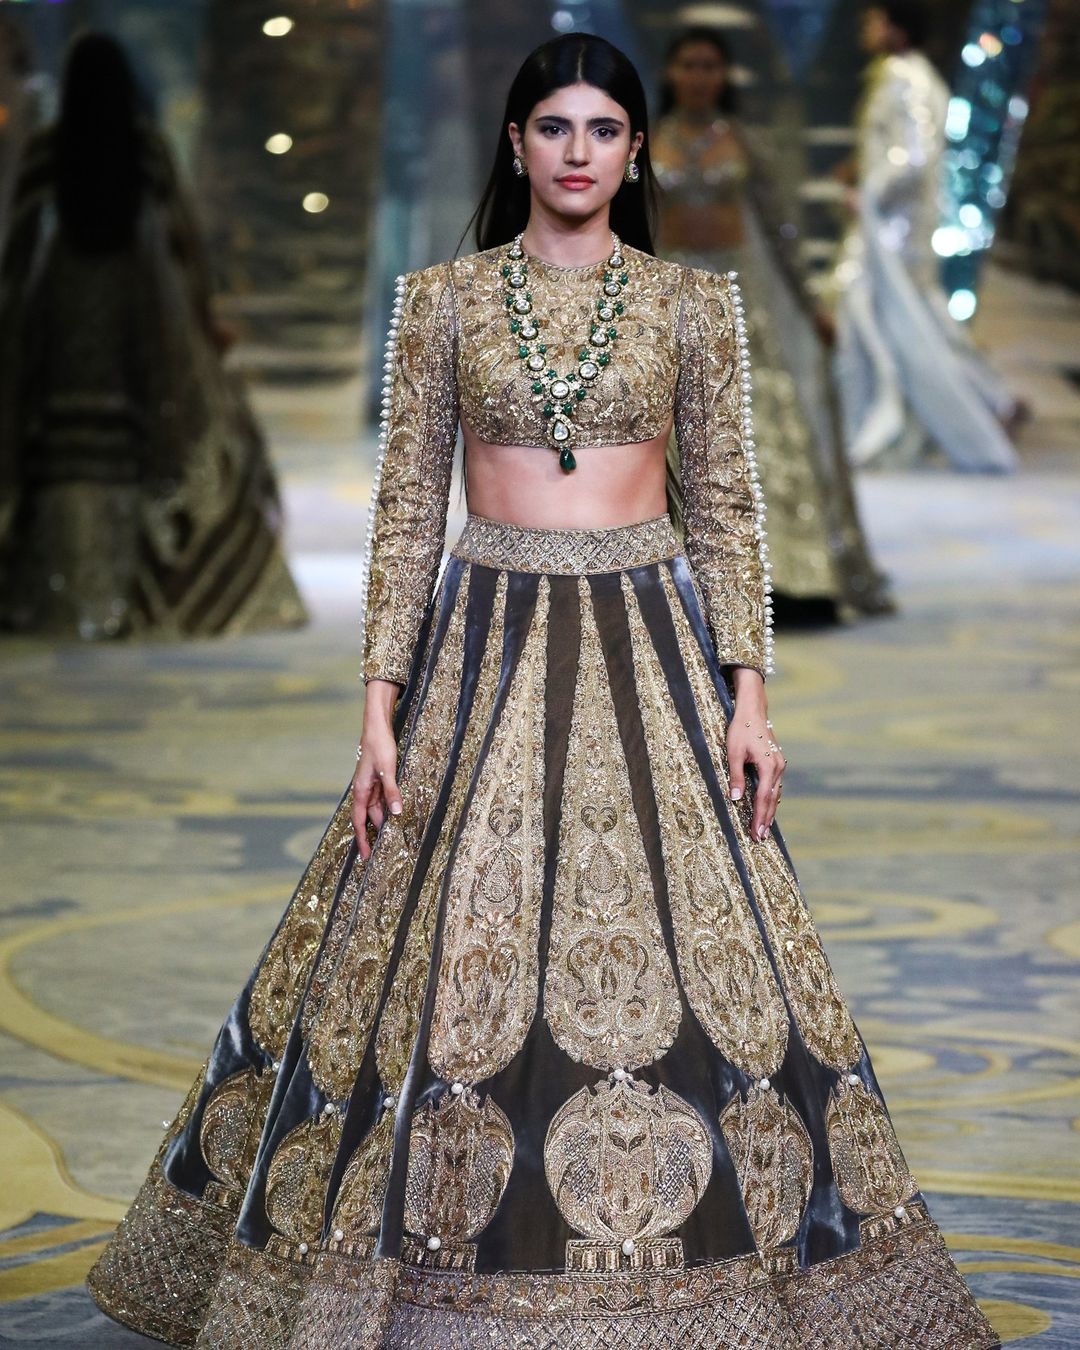 Manish Malhotra Heralds In The Era Of The Bold Bride With His Latest Couture Collection: True artistry on full display here. Photo Credit: www.instagram.com